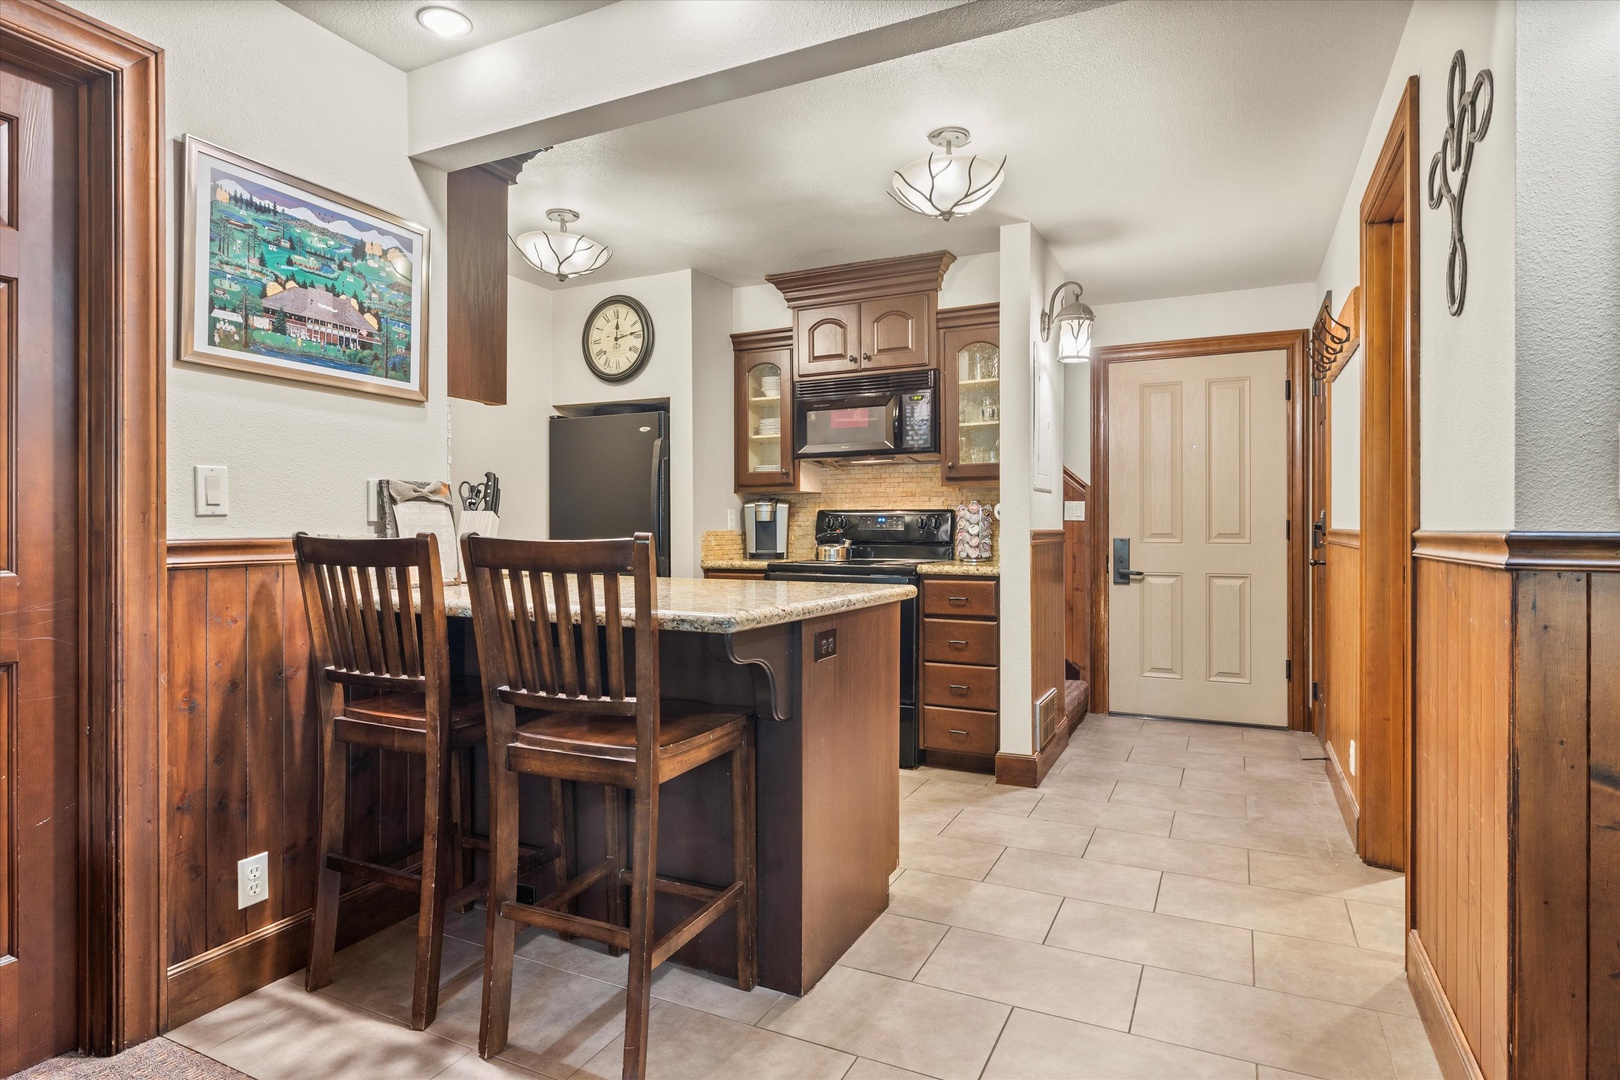 Sip morning coffee or grab a bit at the kitchen counter, with seating for 2